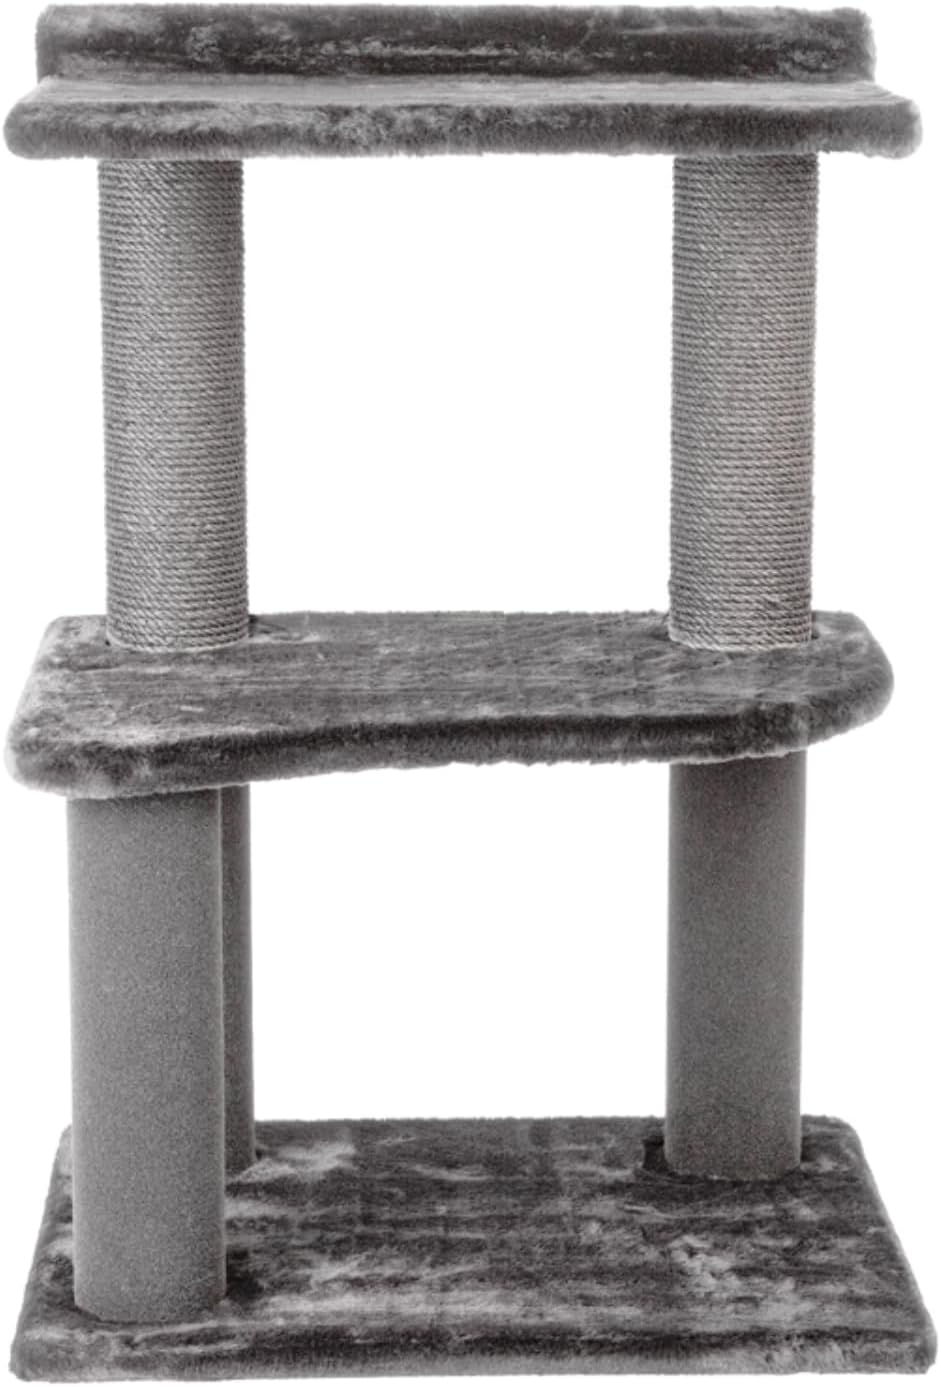 34 Inch Classic Comfort for Indoor Modern Premium Cats and Kittens Scratching Tower Larger Base for Better Stability, (Grey)